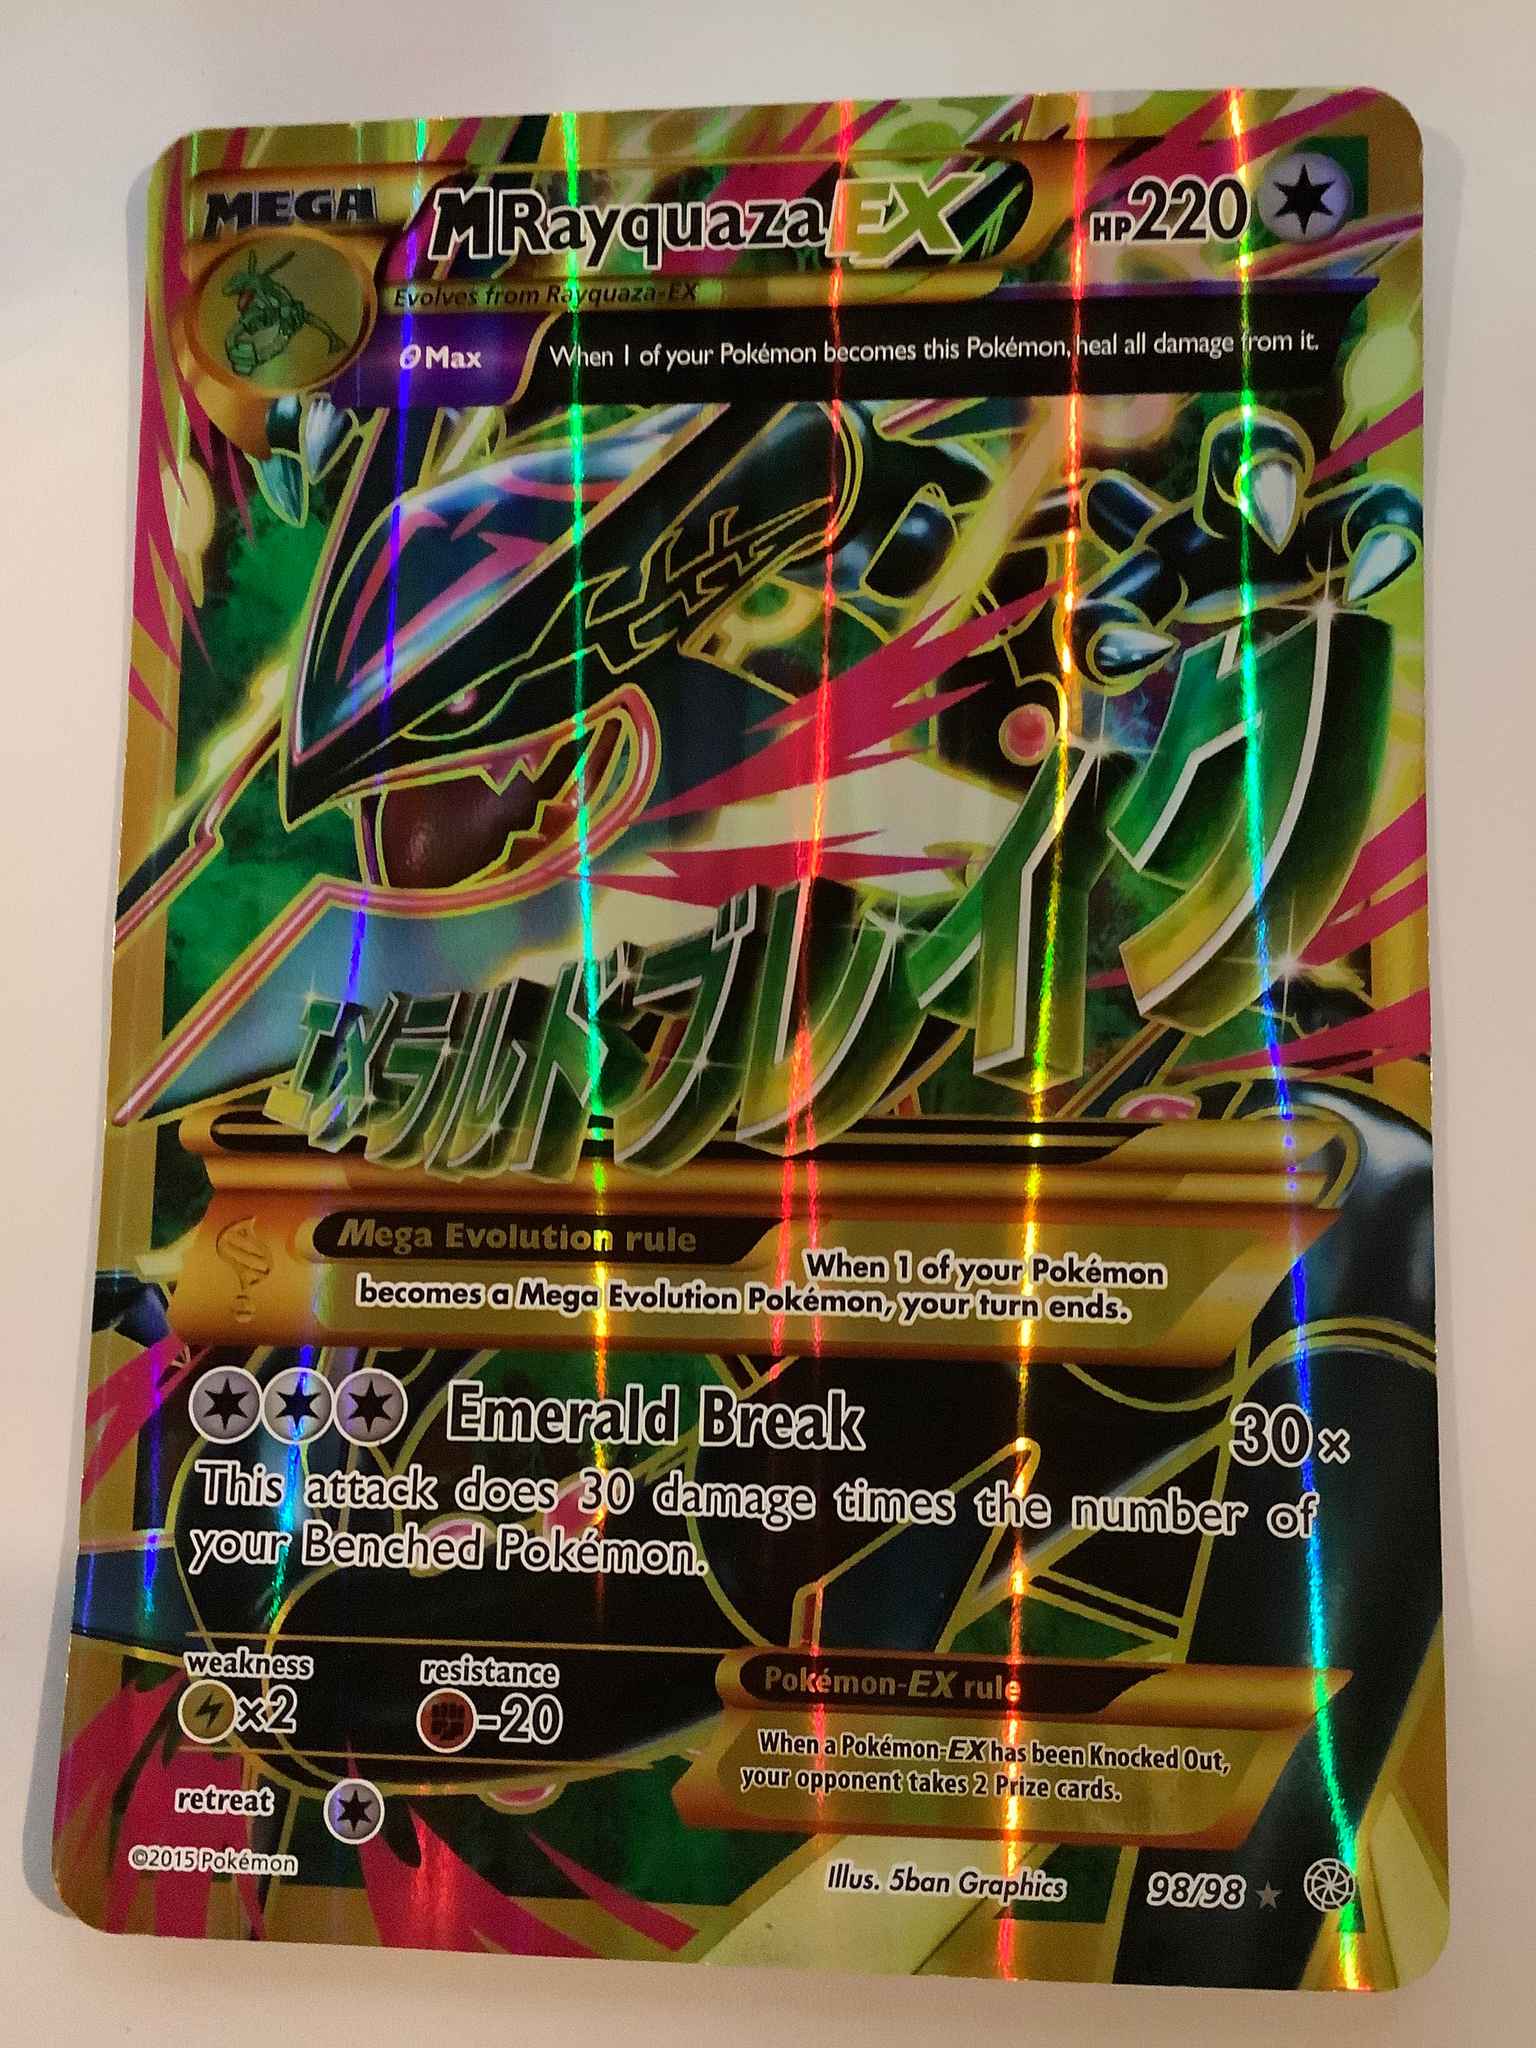 Mega Rayquaza 98 98 Ancient Origins Ex Lightly Played Holofoil Almost Near Mint M Rayquaza Ex 98 98 Ancient Origins Jumbo Cards Pokemon Online Gaming Store For Cards Miniatures Singles Packs Booster Boxes